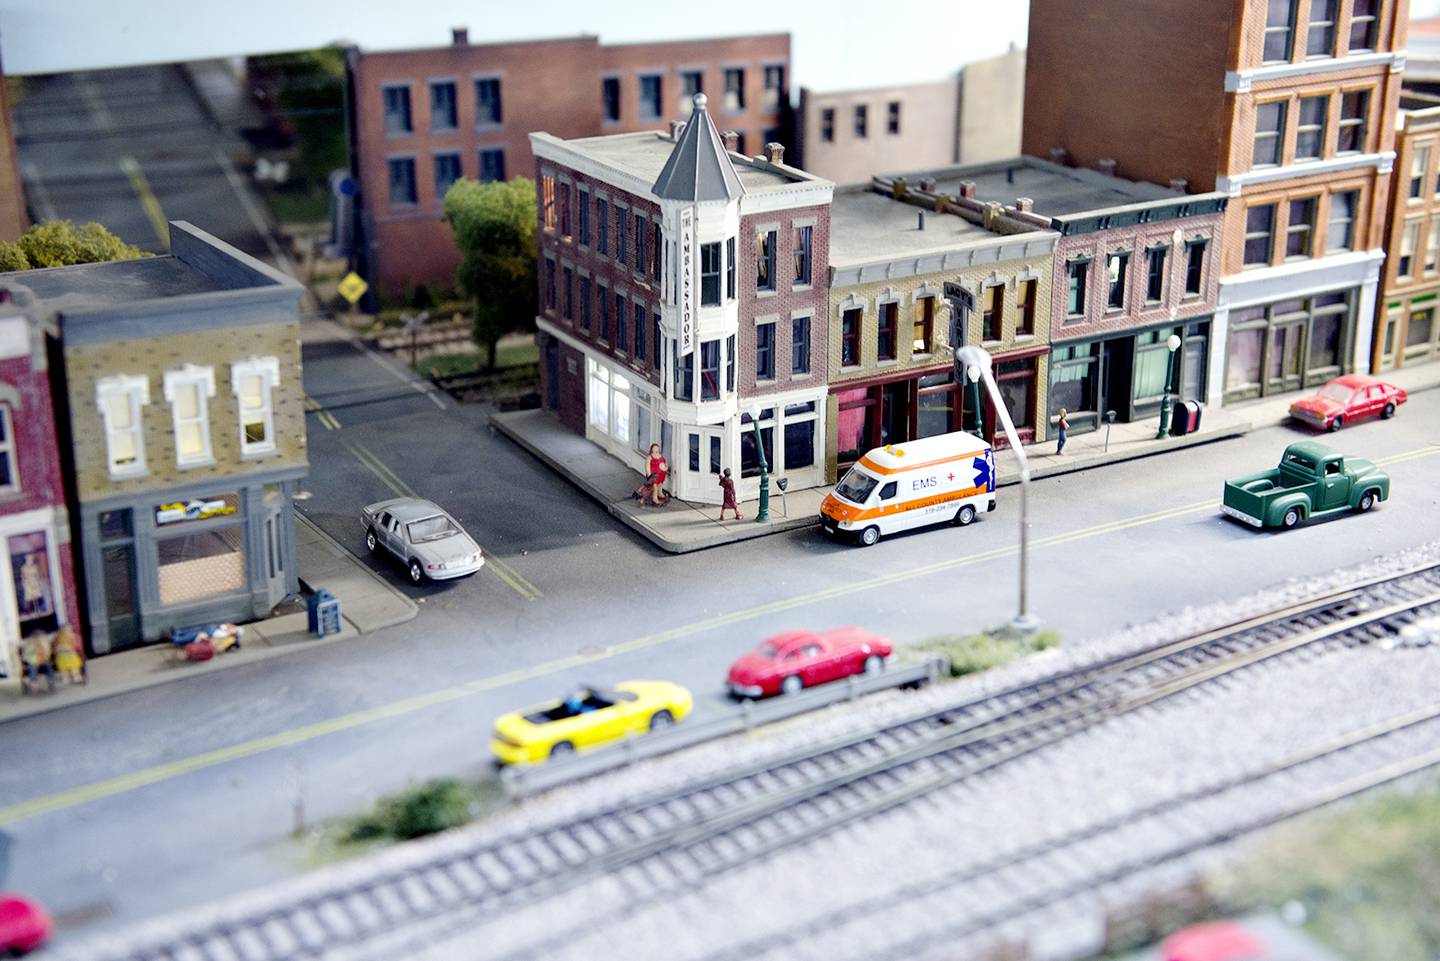 Scenes like this are sprinkled throughout the railroad layout that add a sense of authenticity to the model.